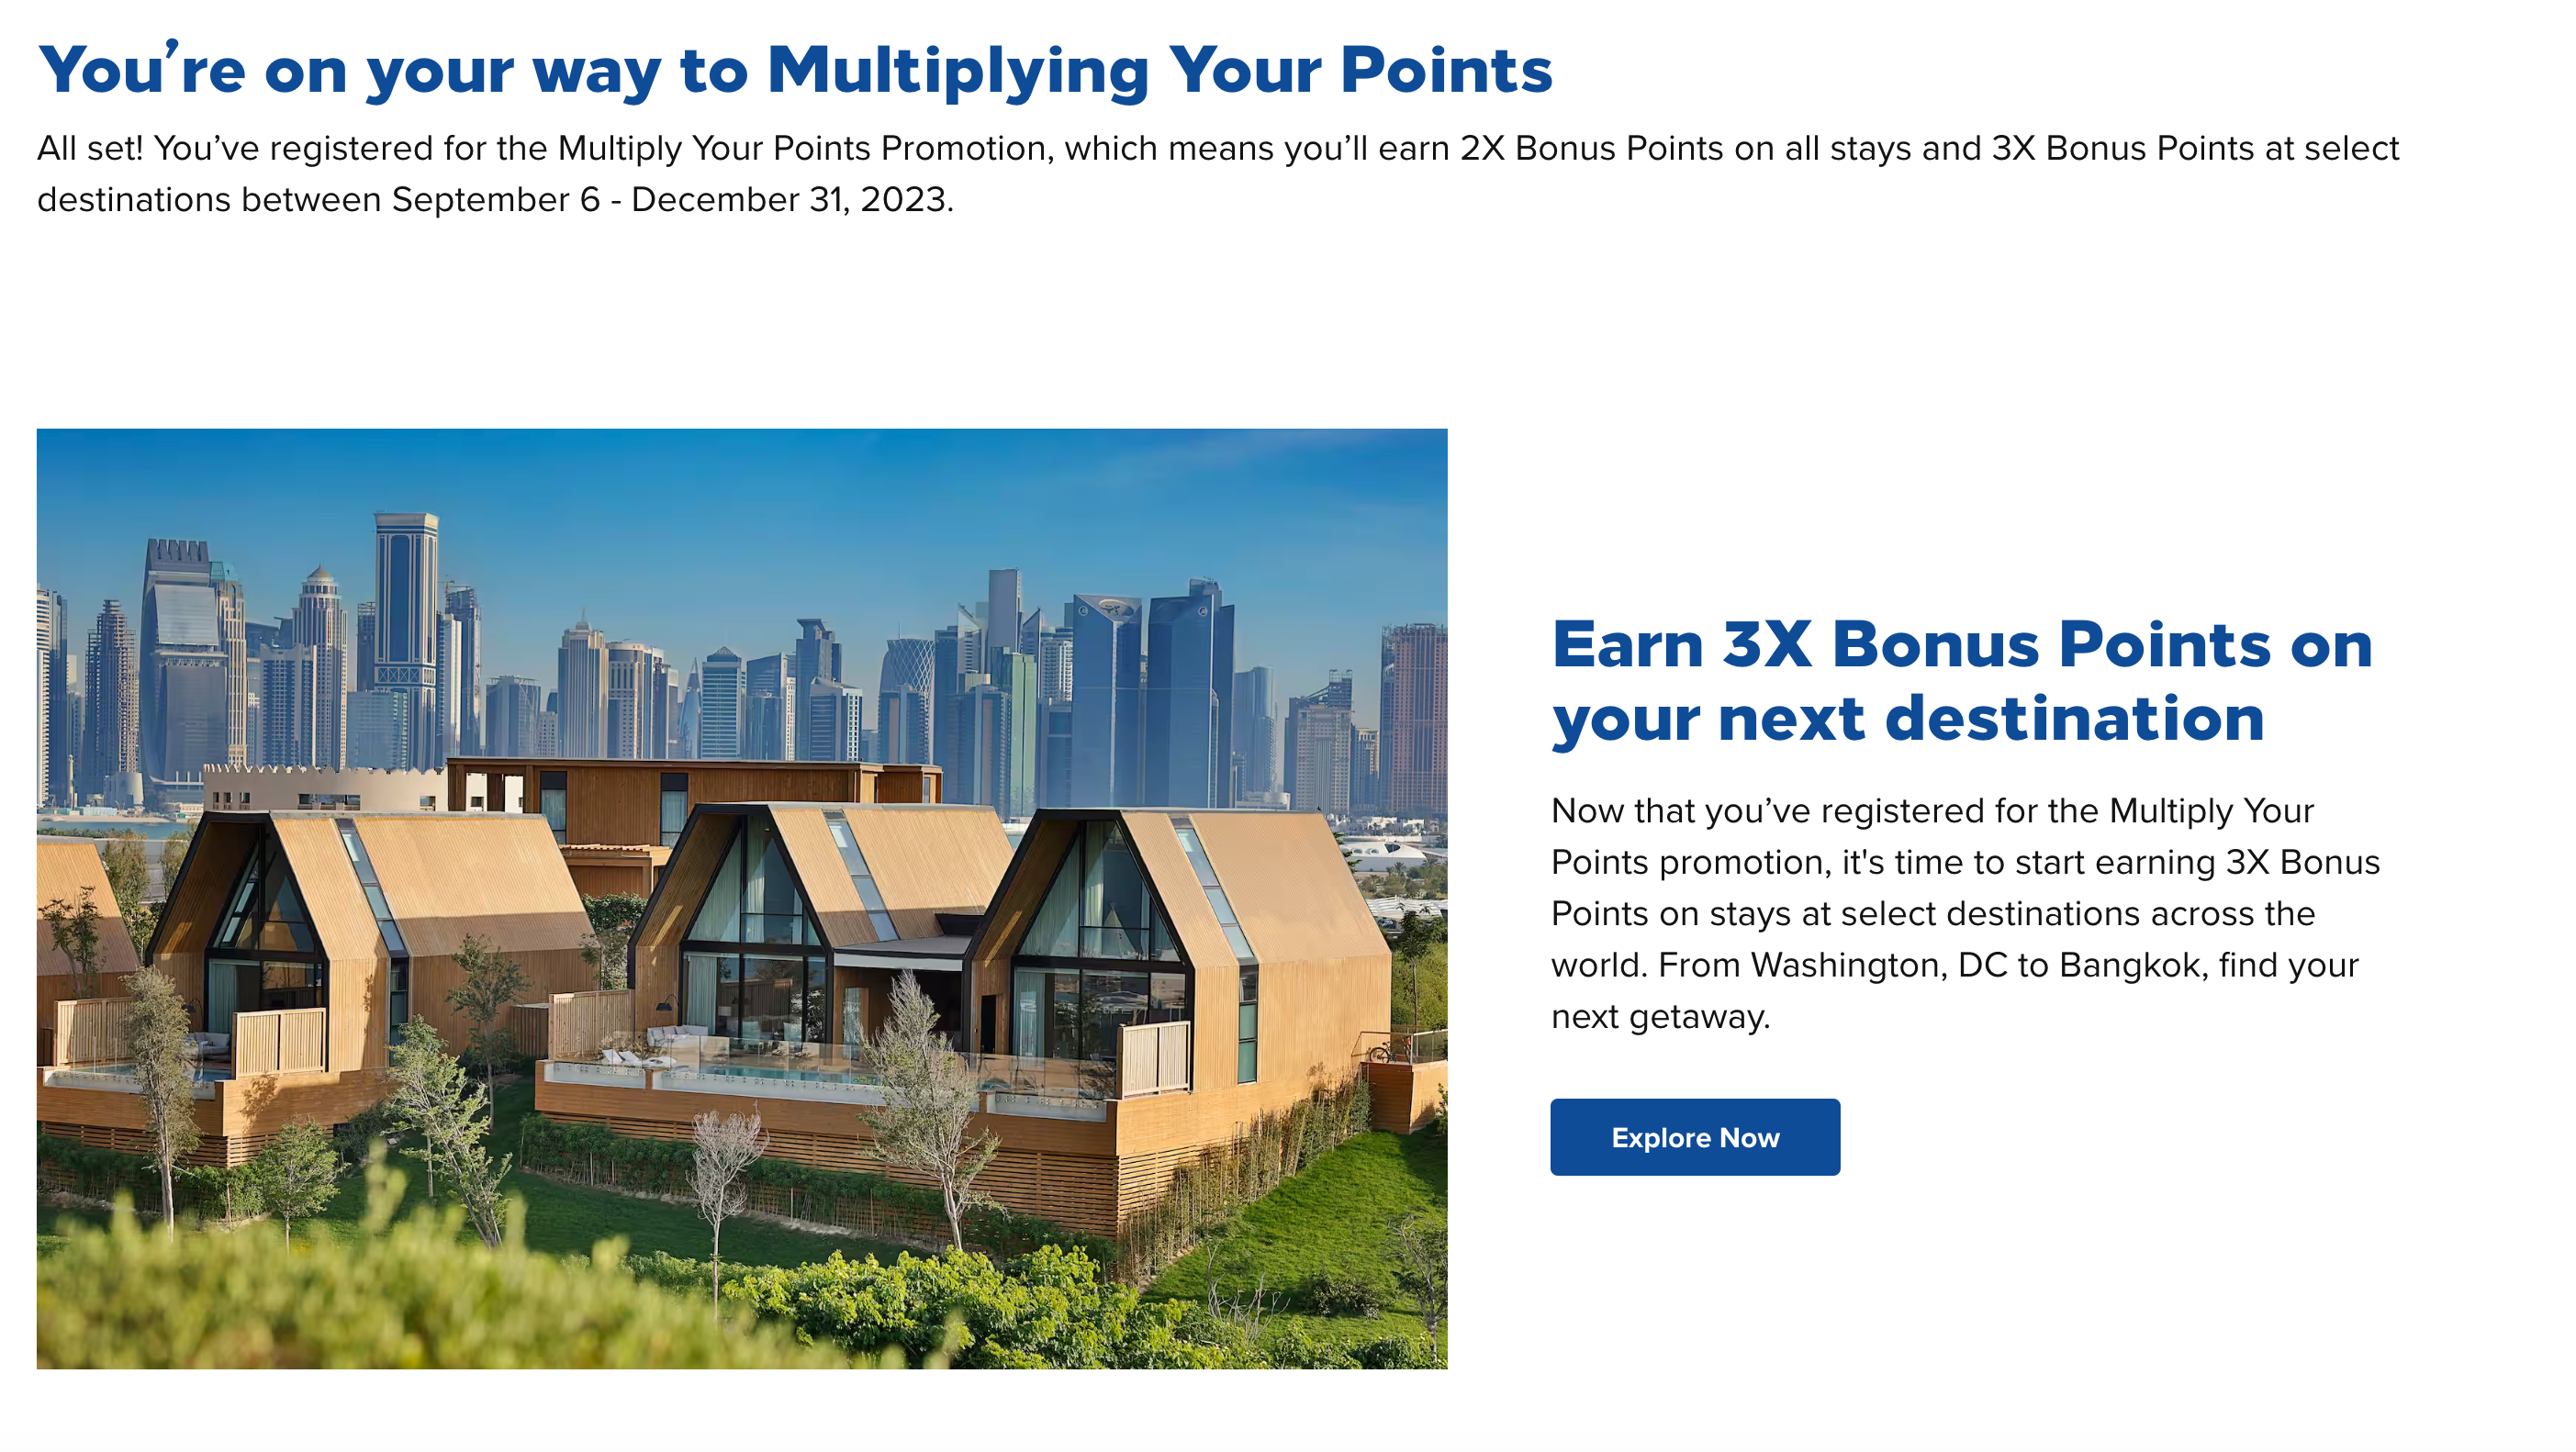 Hilton multiply your points promo registration page.